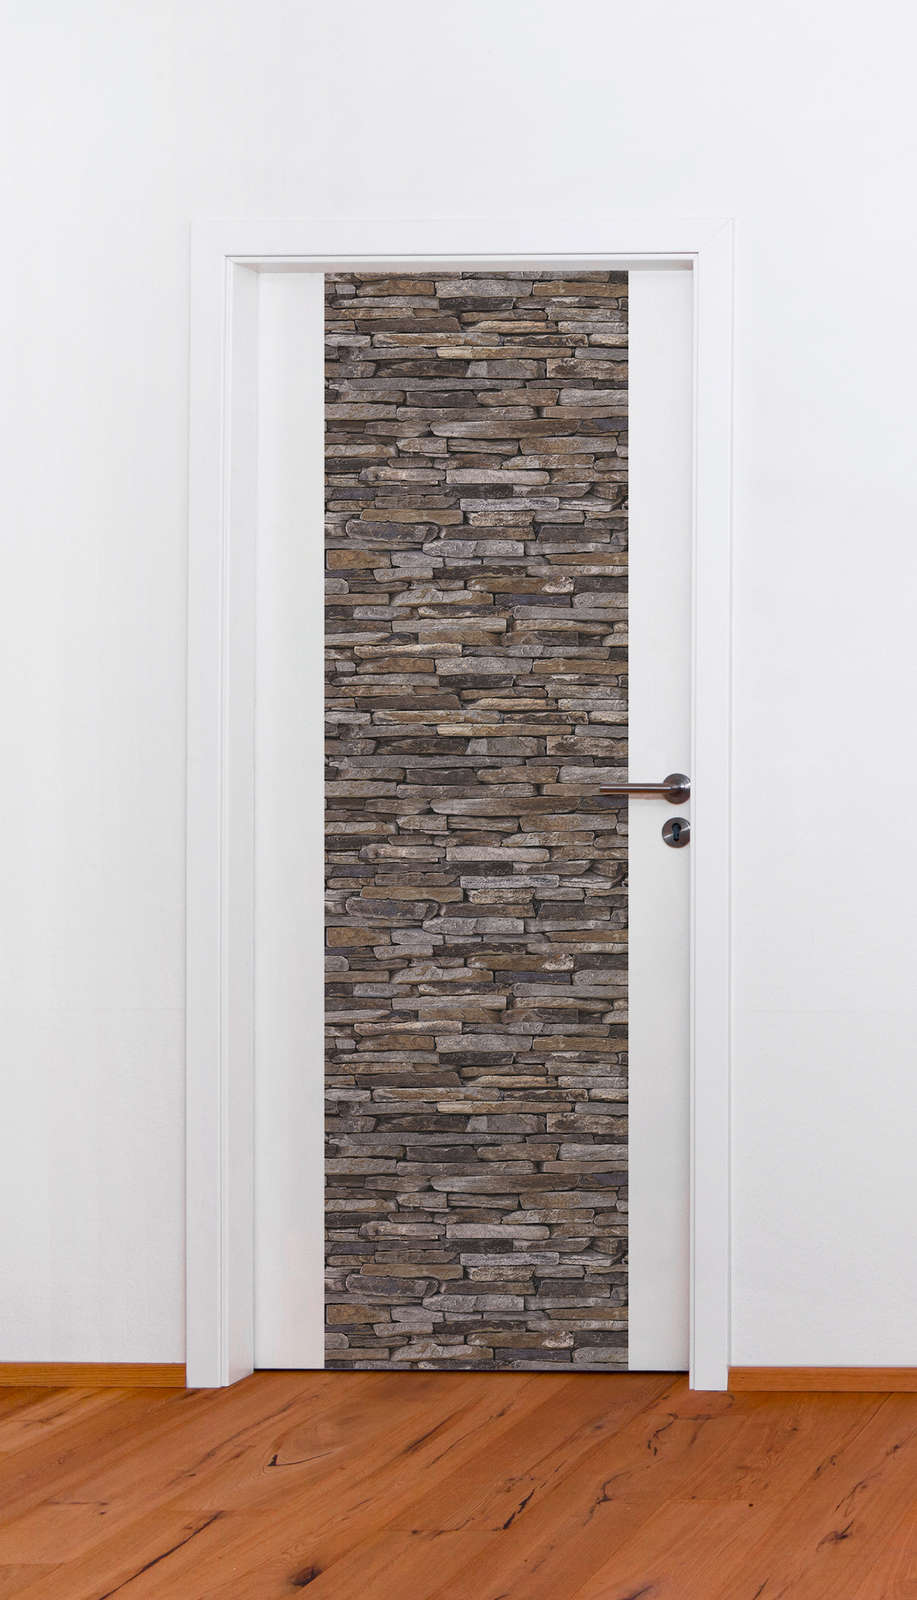             Masonry wallpaper with stone look & 3D motif - brown
        